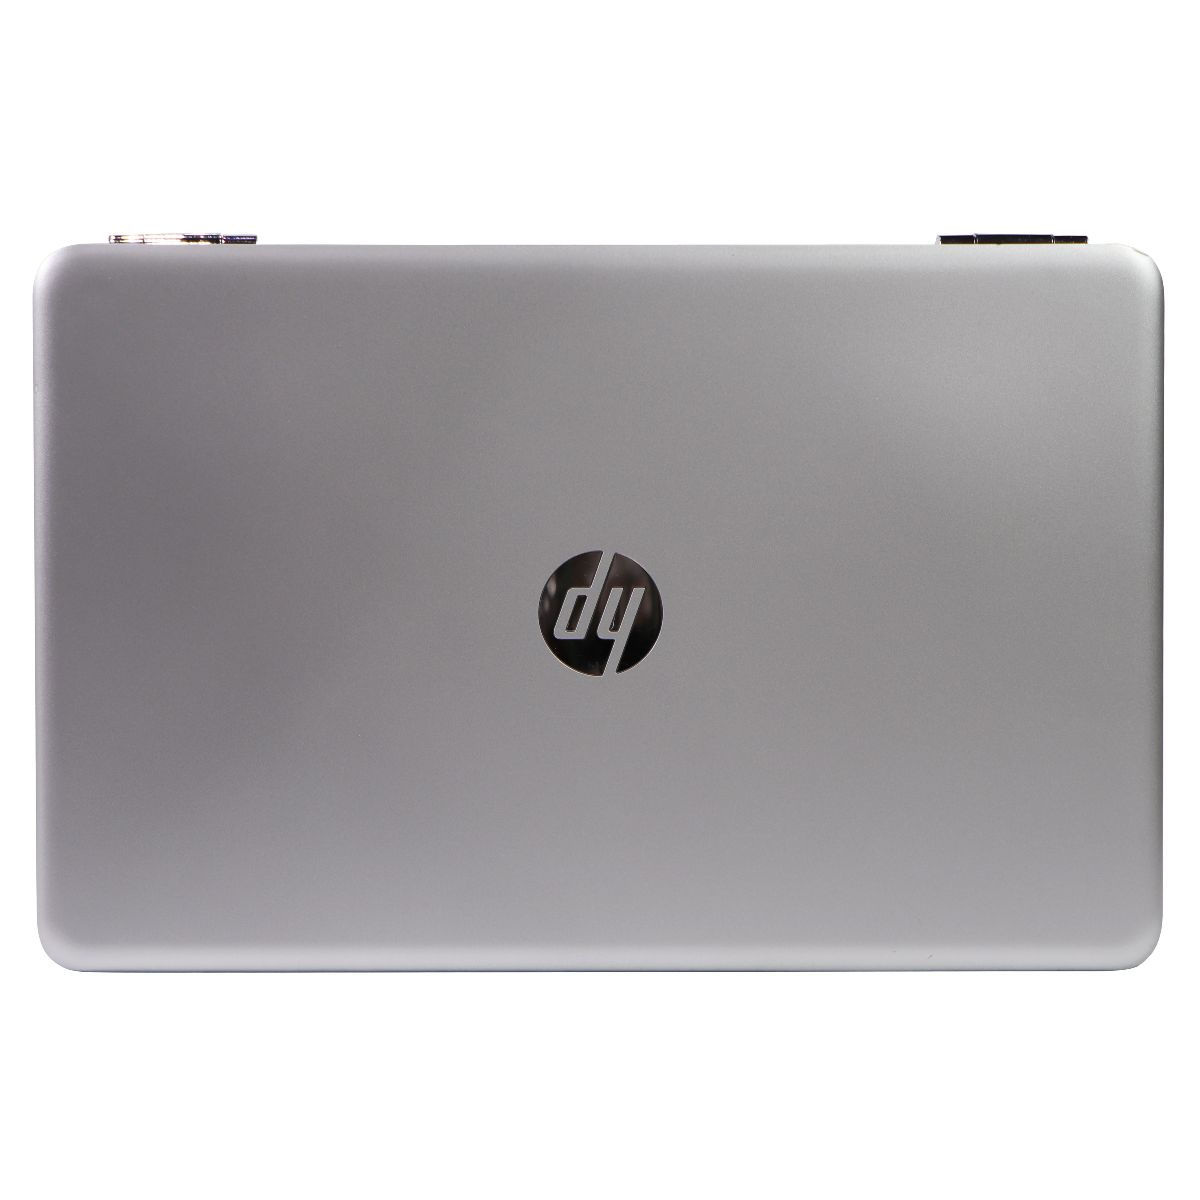 HP Pavilion 15.6-in Touchscreen Laptop (15-au057cl) i5-6200U/1TB SSD/8GB/10 Home Laptops - PC Laptops & Netbooks HP    - Simple Cell Bulk Wholesale Pricing - USA Seller